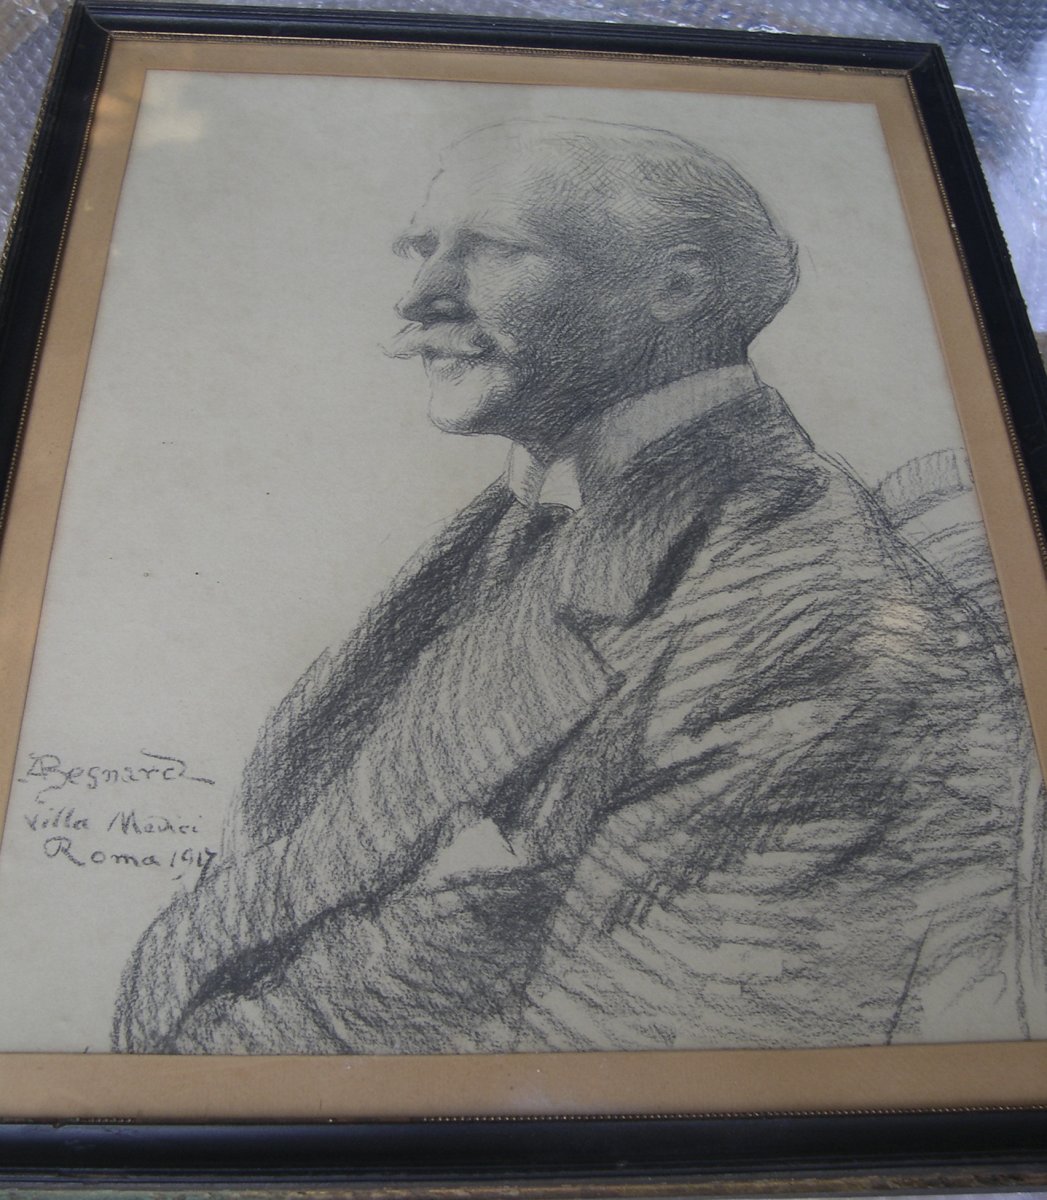 Image of James Rennell Rodd, 1st Baron Rennell (1858-1941) diplomat and scholar